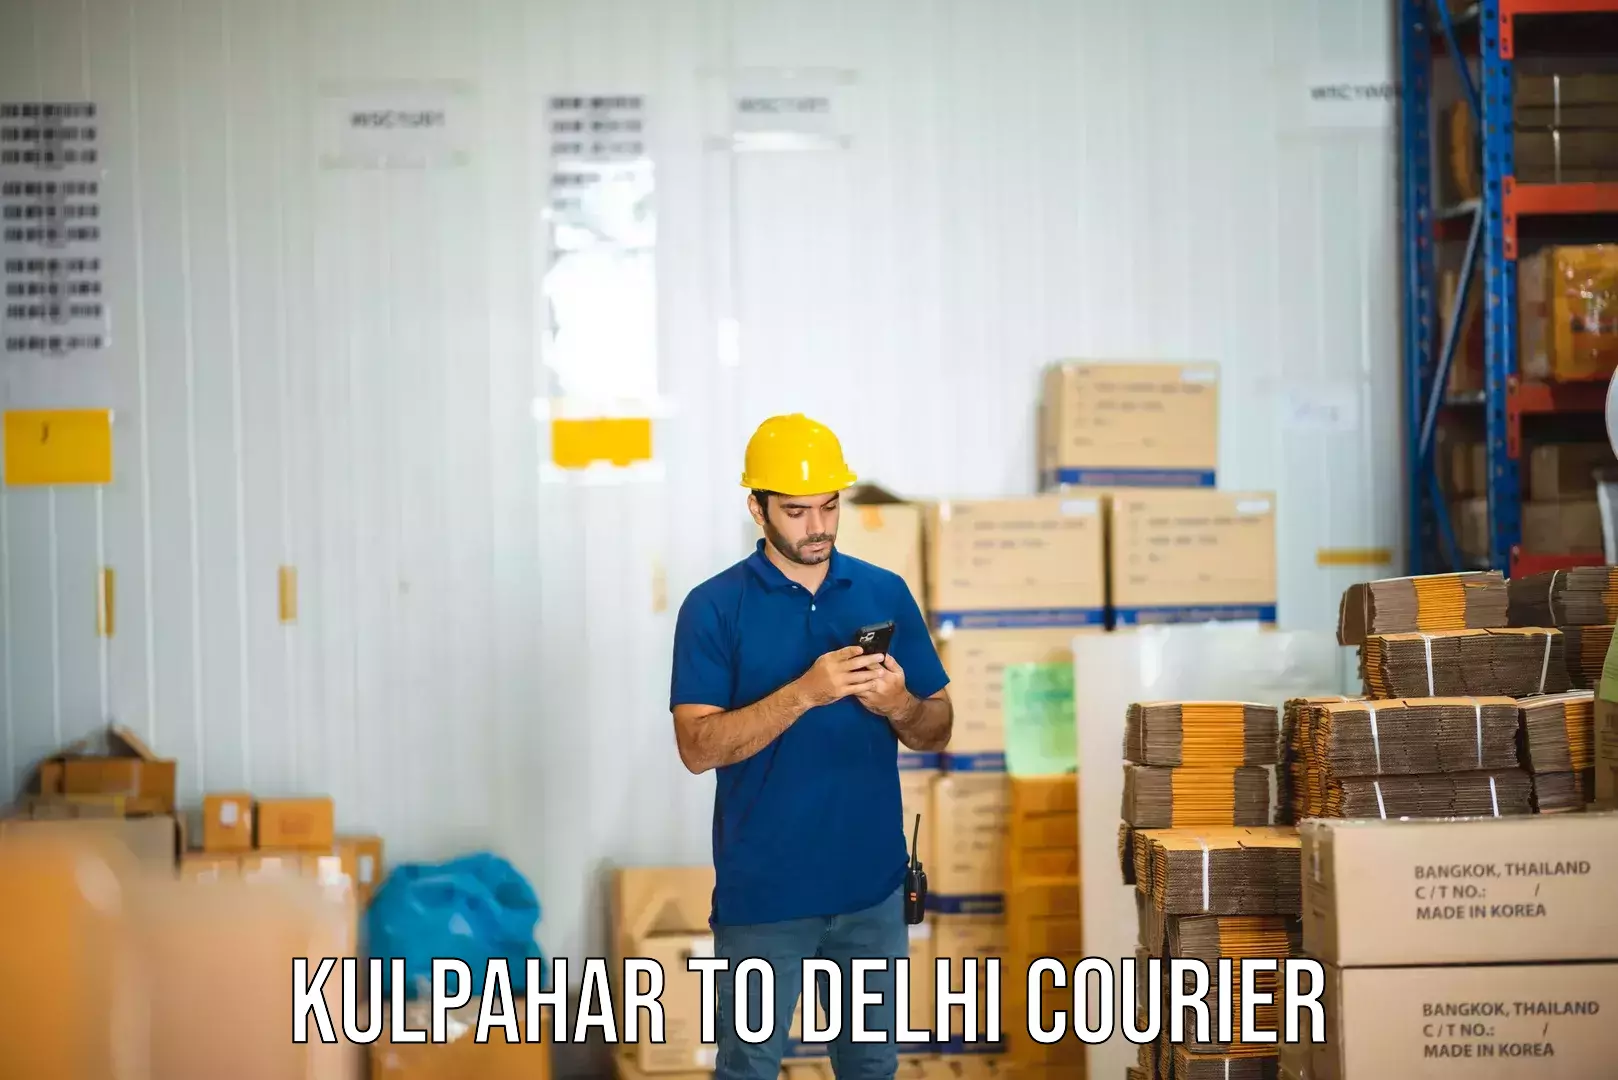 Nationwide shipping services Kulpahar to NCR